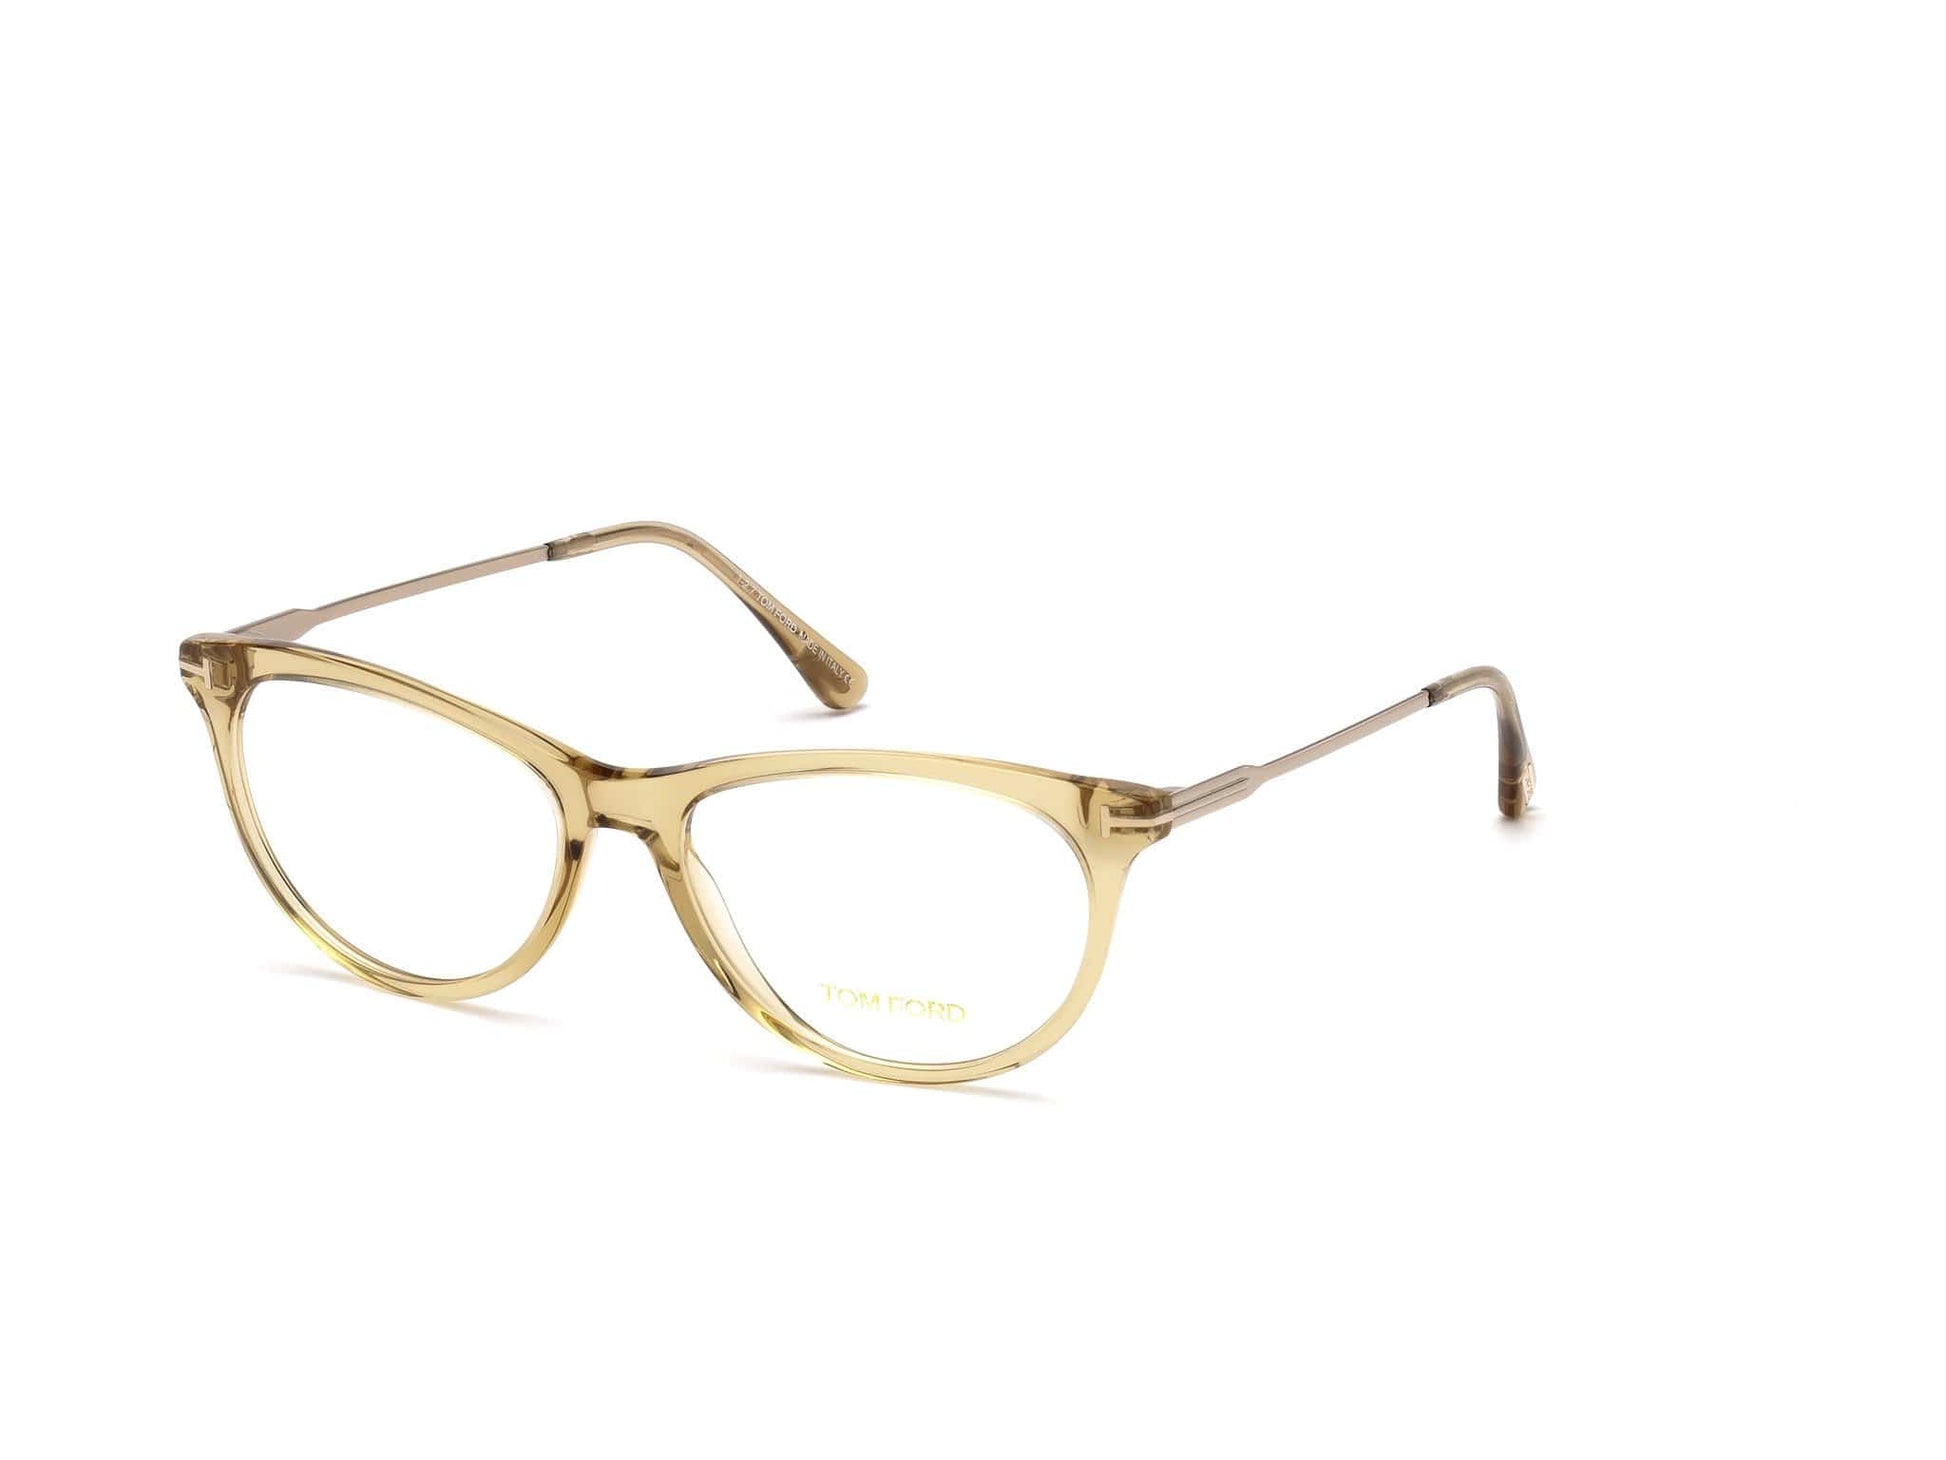 Tom Ford FT5509 Cat Eyeglasses 045-045 - Shiny Transparent Champagne Front, Shiny Rose Gold Temples